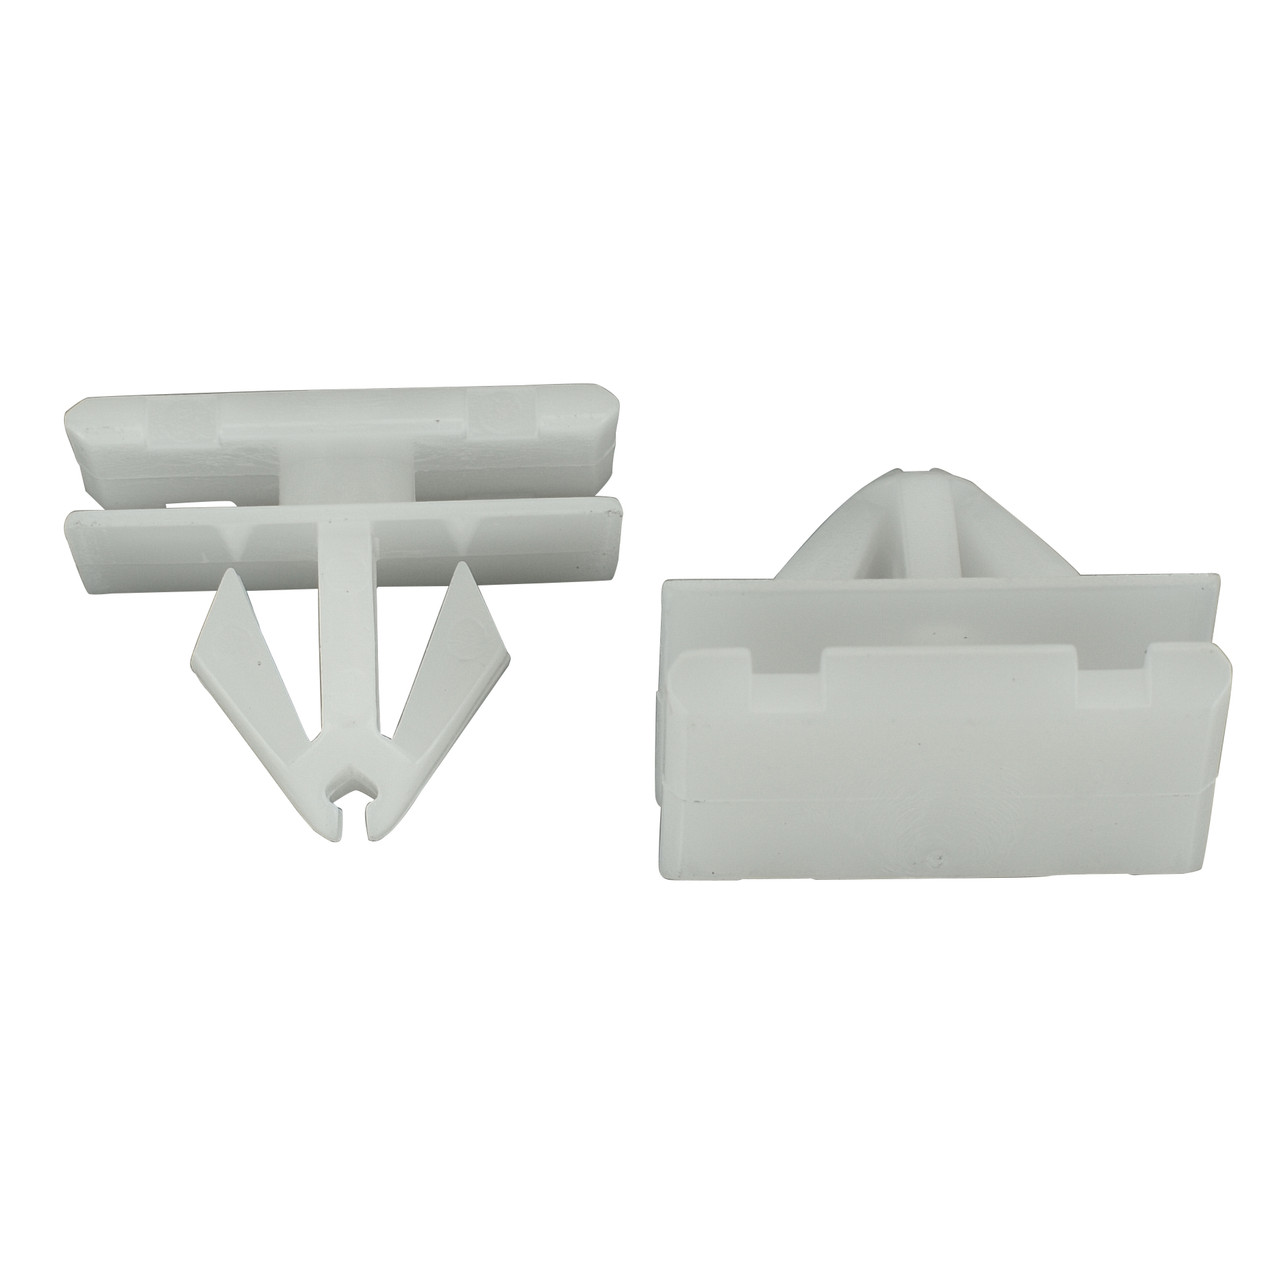 Side Trim Molding Clips - set of (10), Product